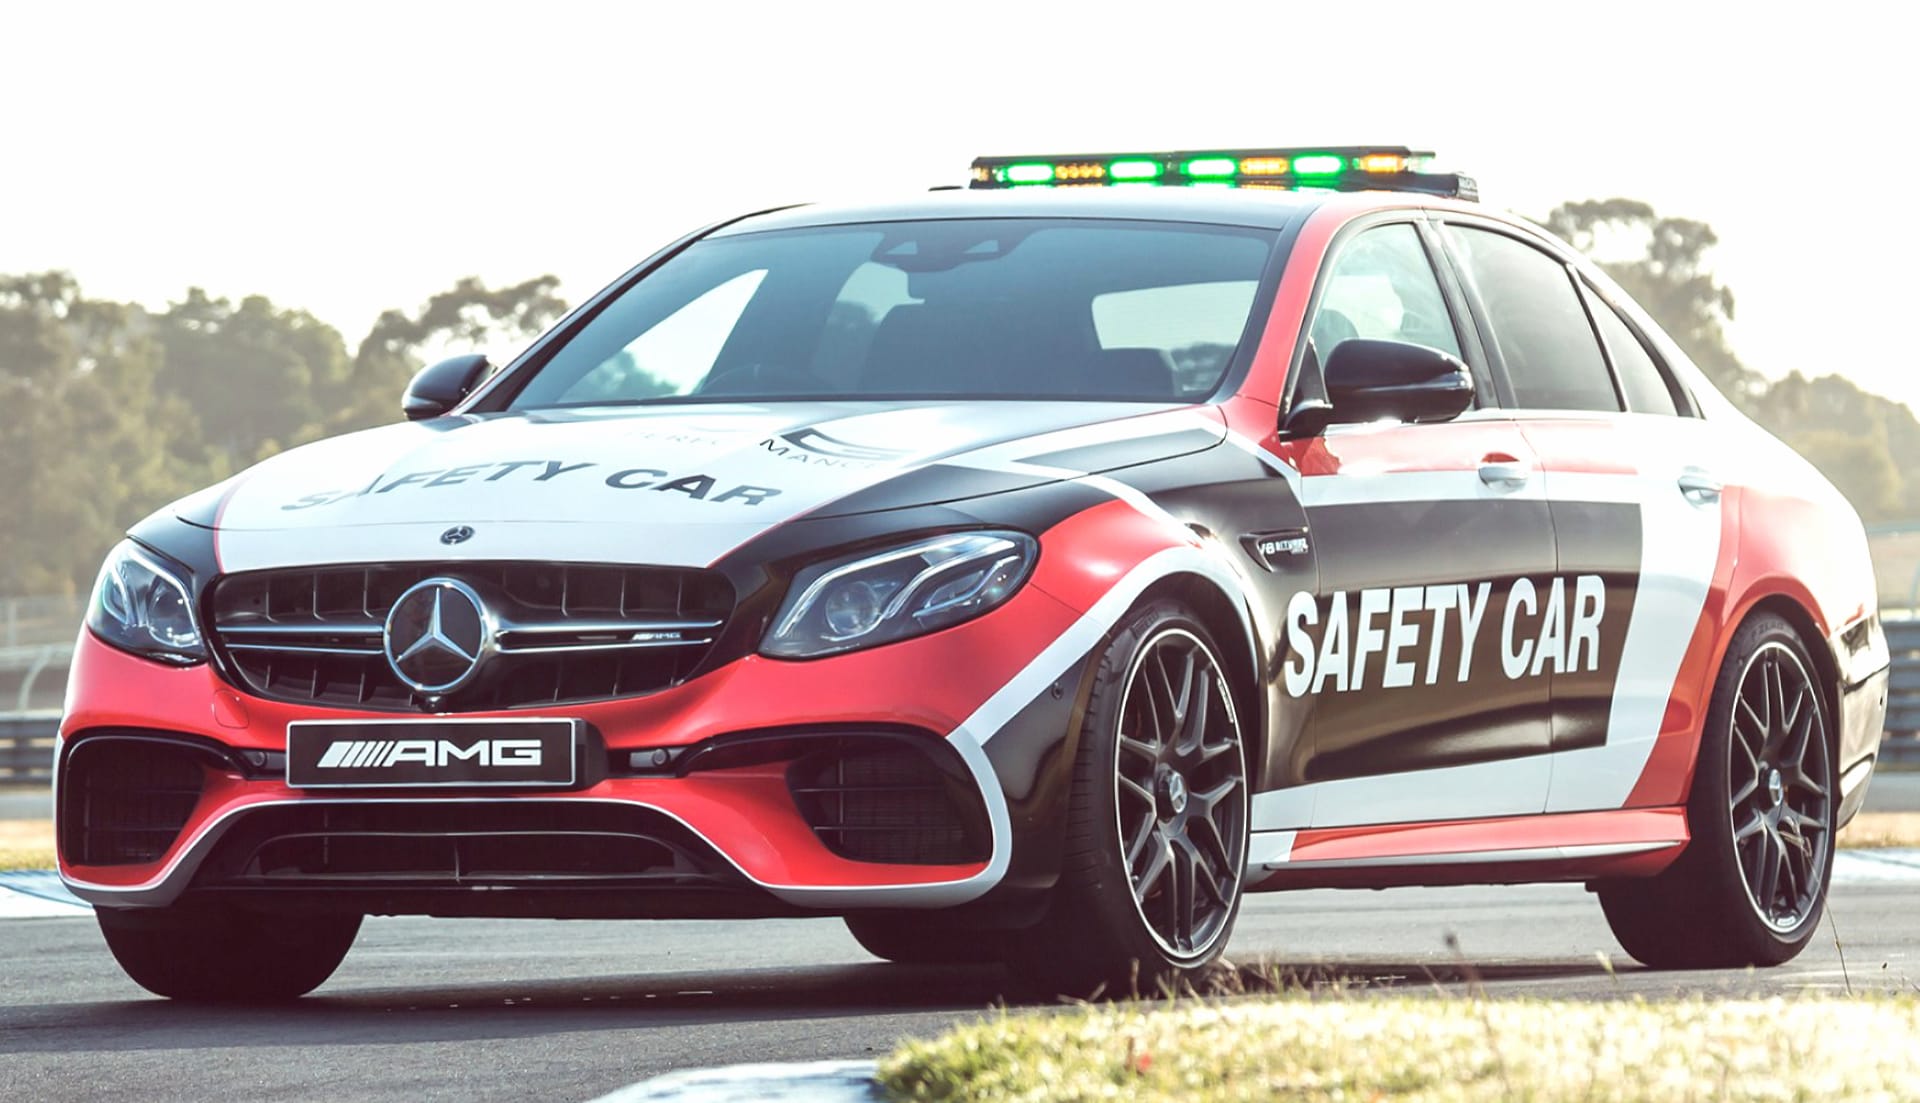 Mercedes-AMG E 63 S Safety Car wallpapers HD quality